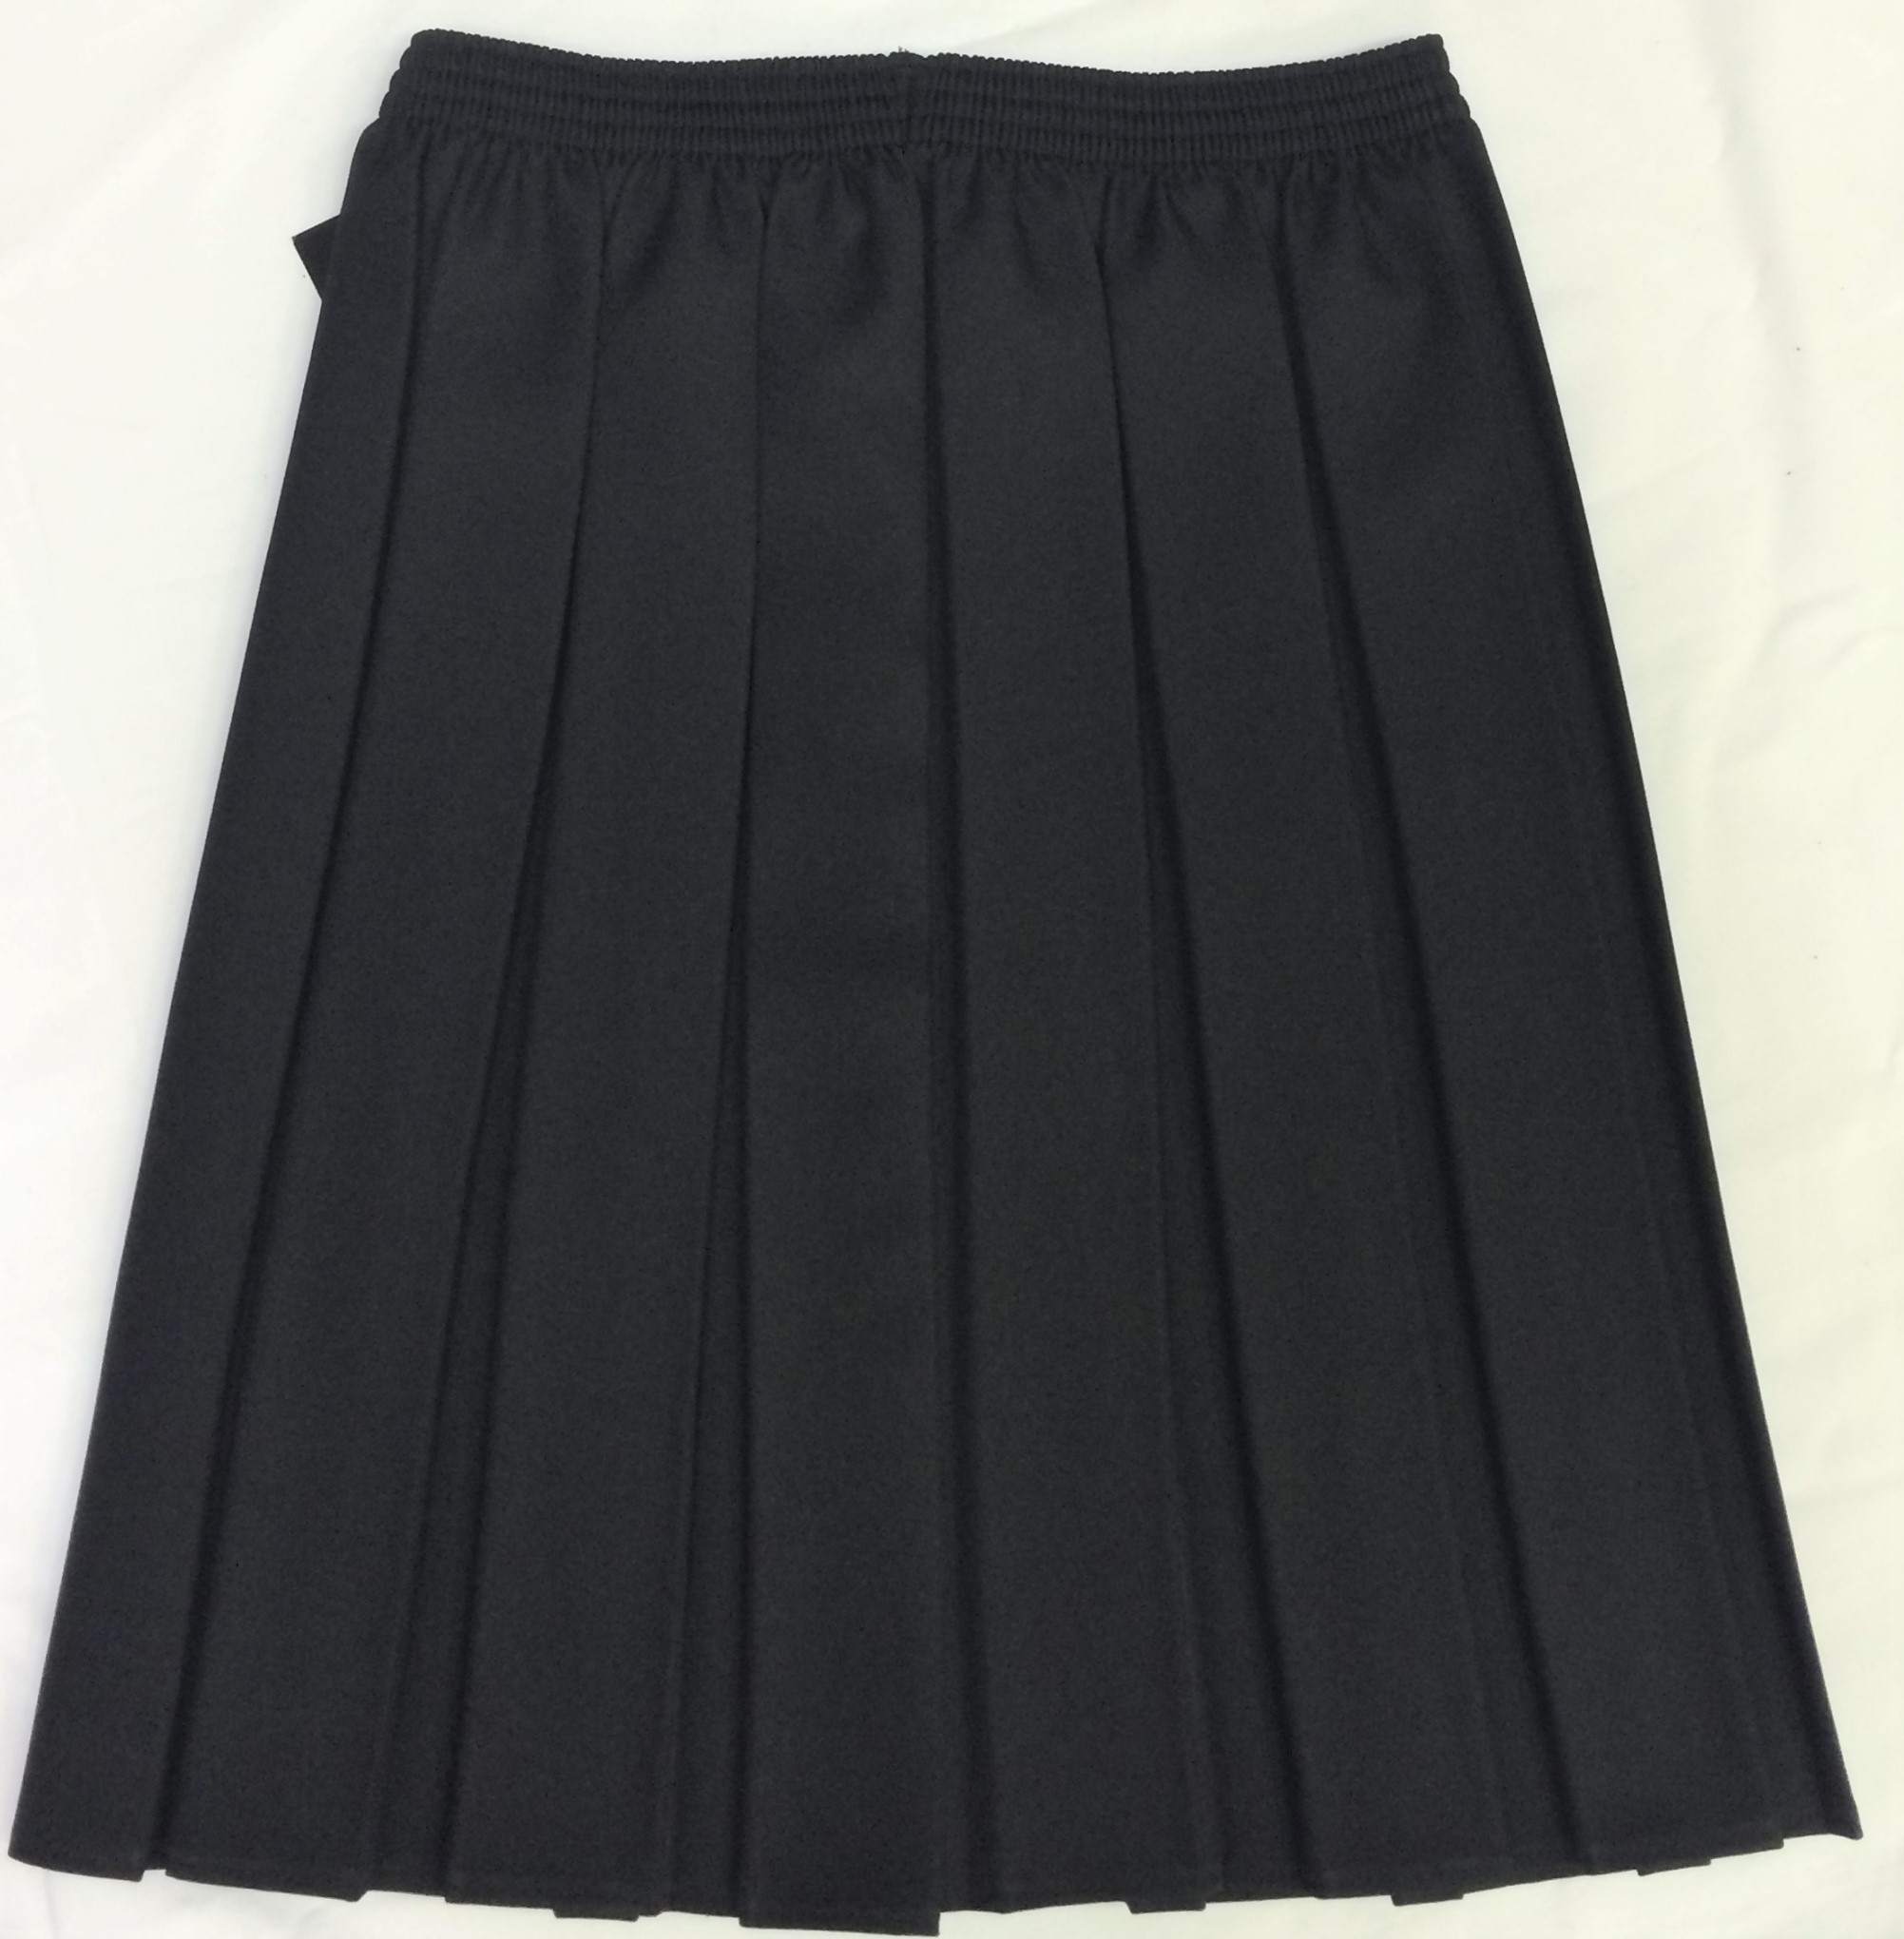 Buy online Black And Gold Box Pleat Maxi Skirt from Skirts  Shorts for  Women by Kazo for 5989 at 0 off  2023 Limeroadcom